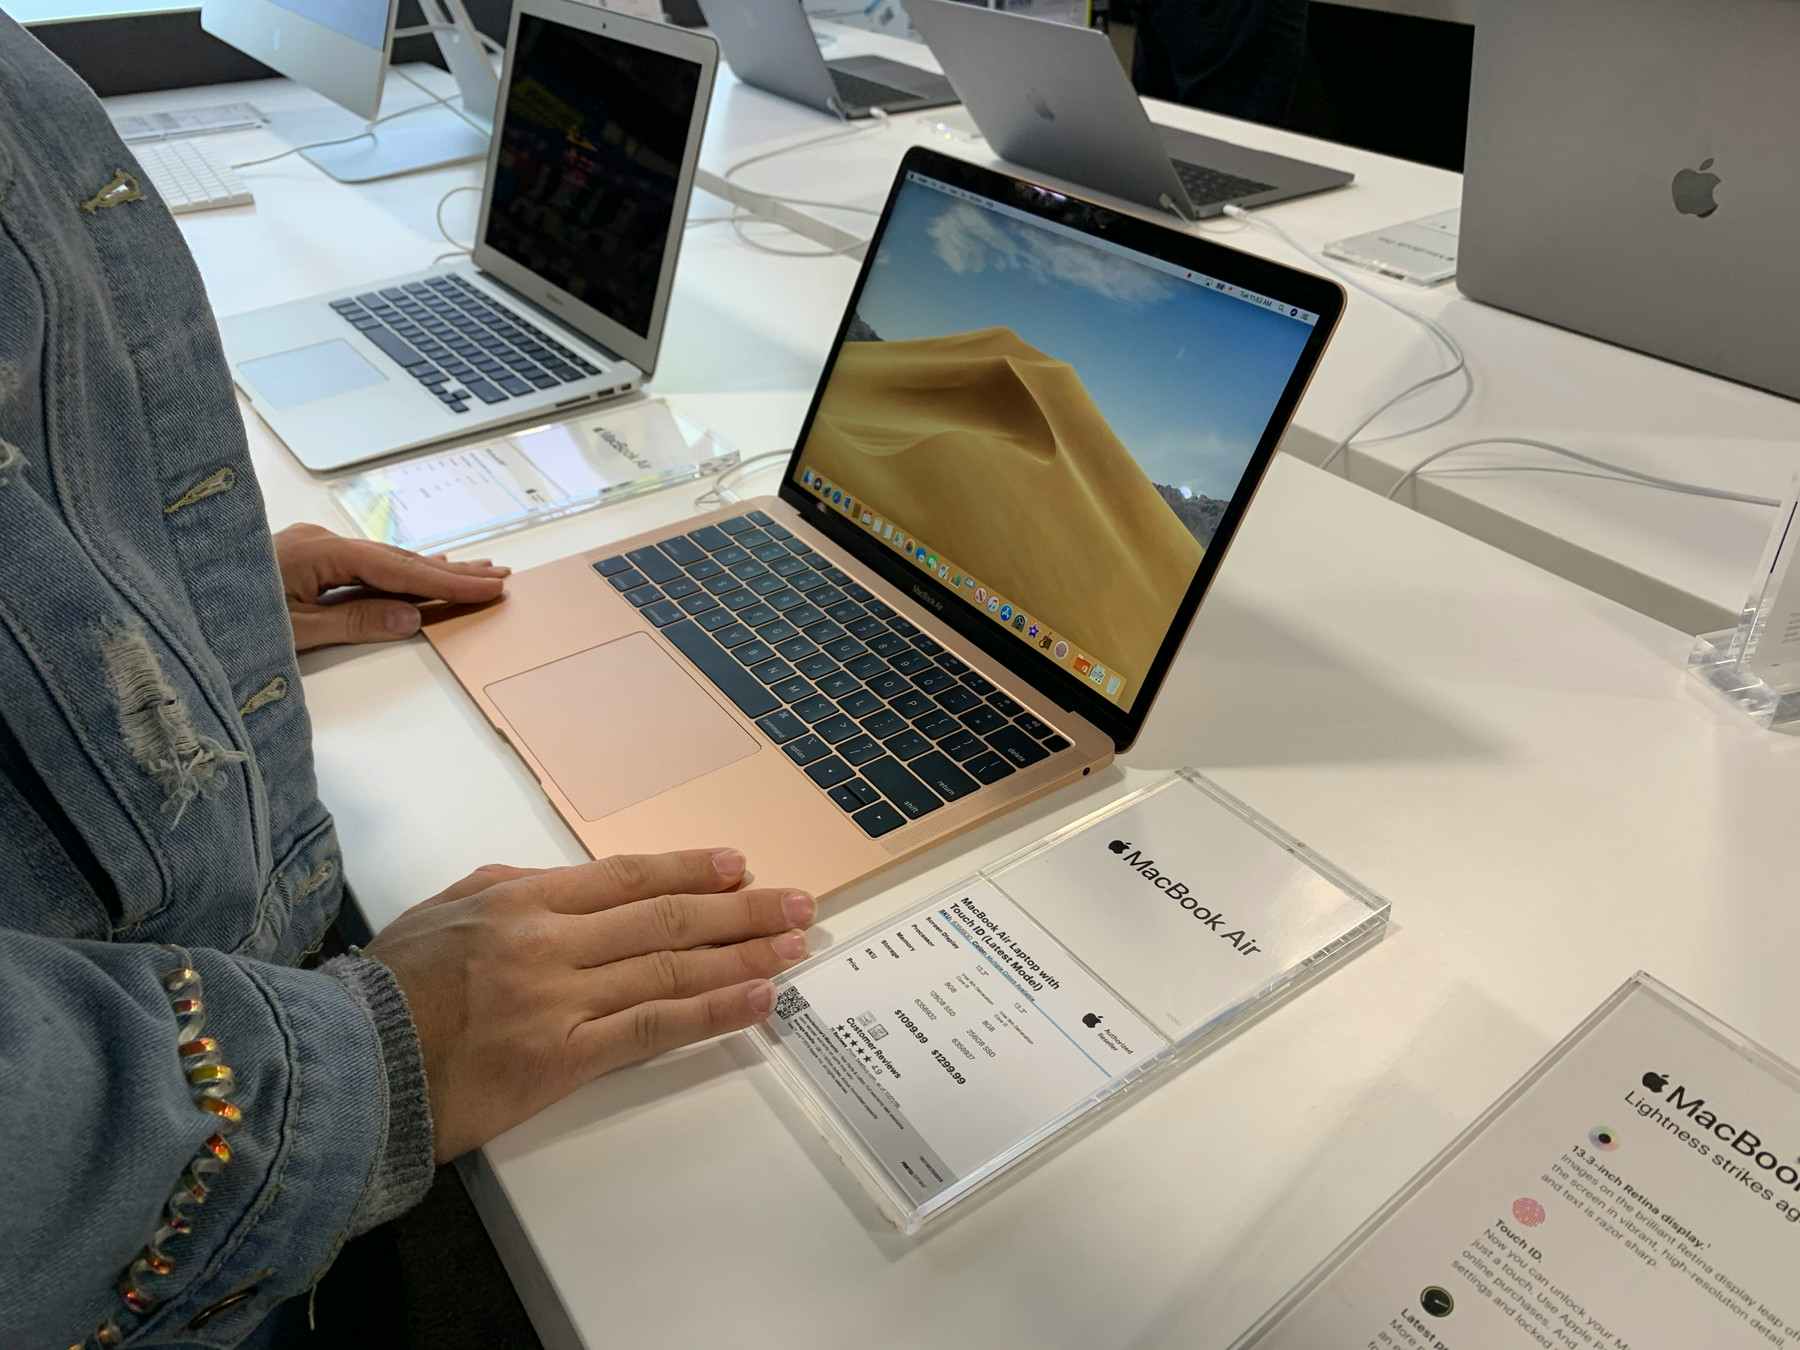 Get a Refurbished MacBook for as Little as $195 at Daily Steals